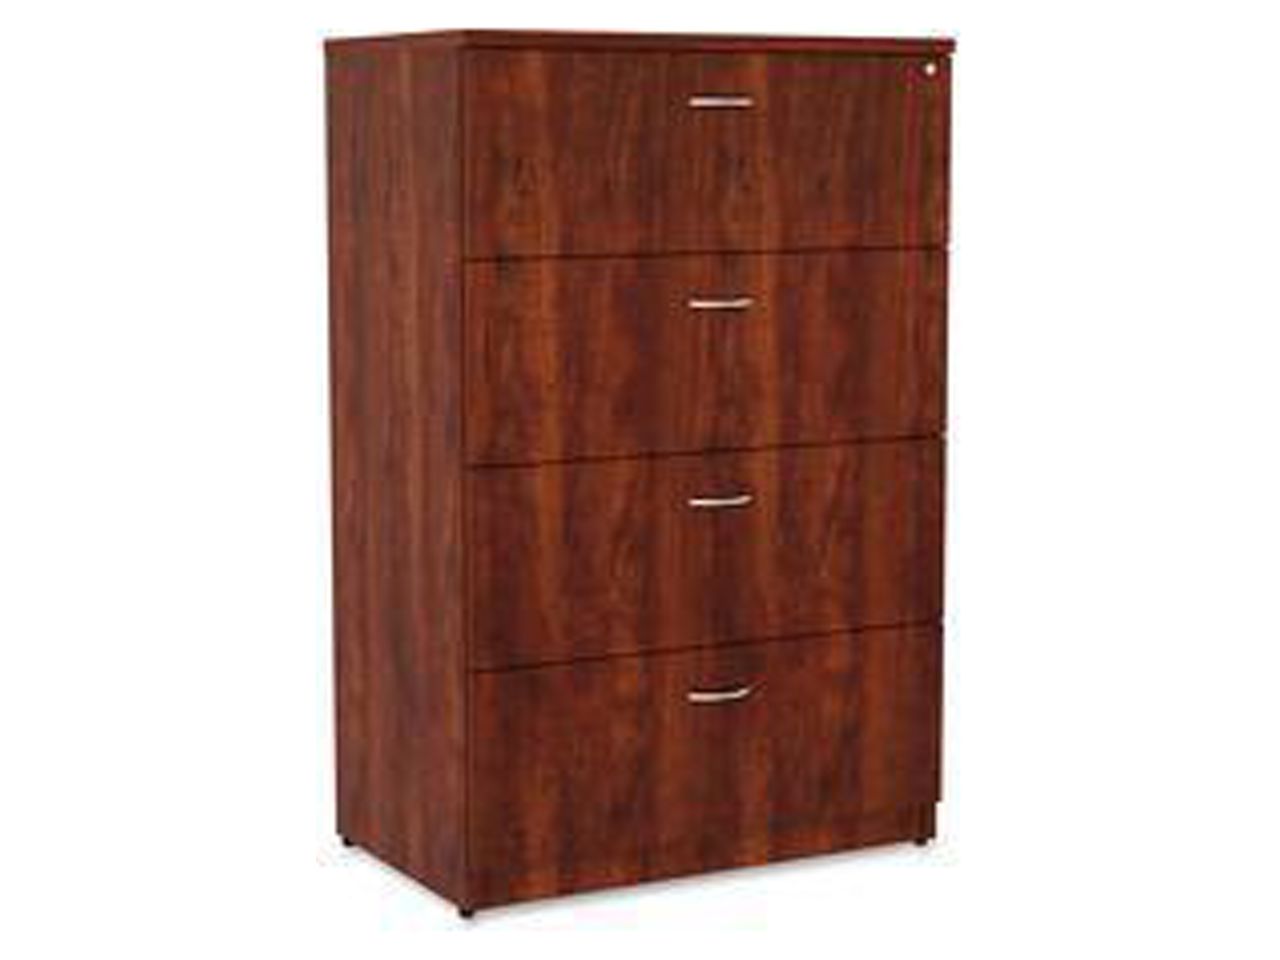 Lorell 4-Drawer Lateral File 35-1/2"x22"x54-3/4" Cherry 34387 - image 5 of 5